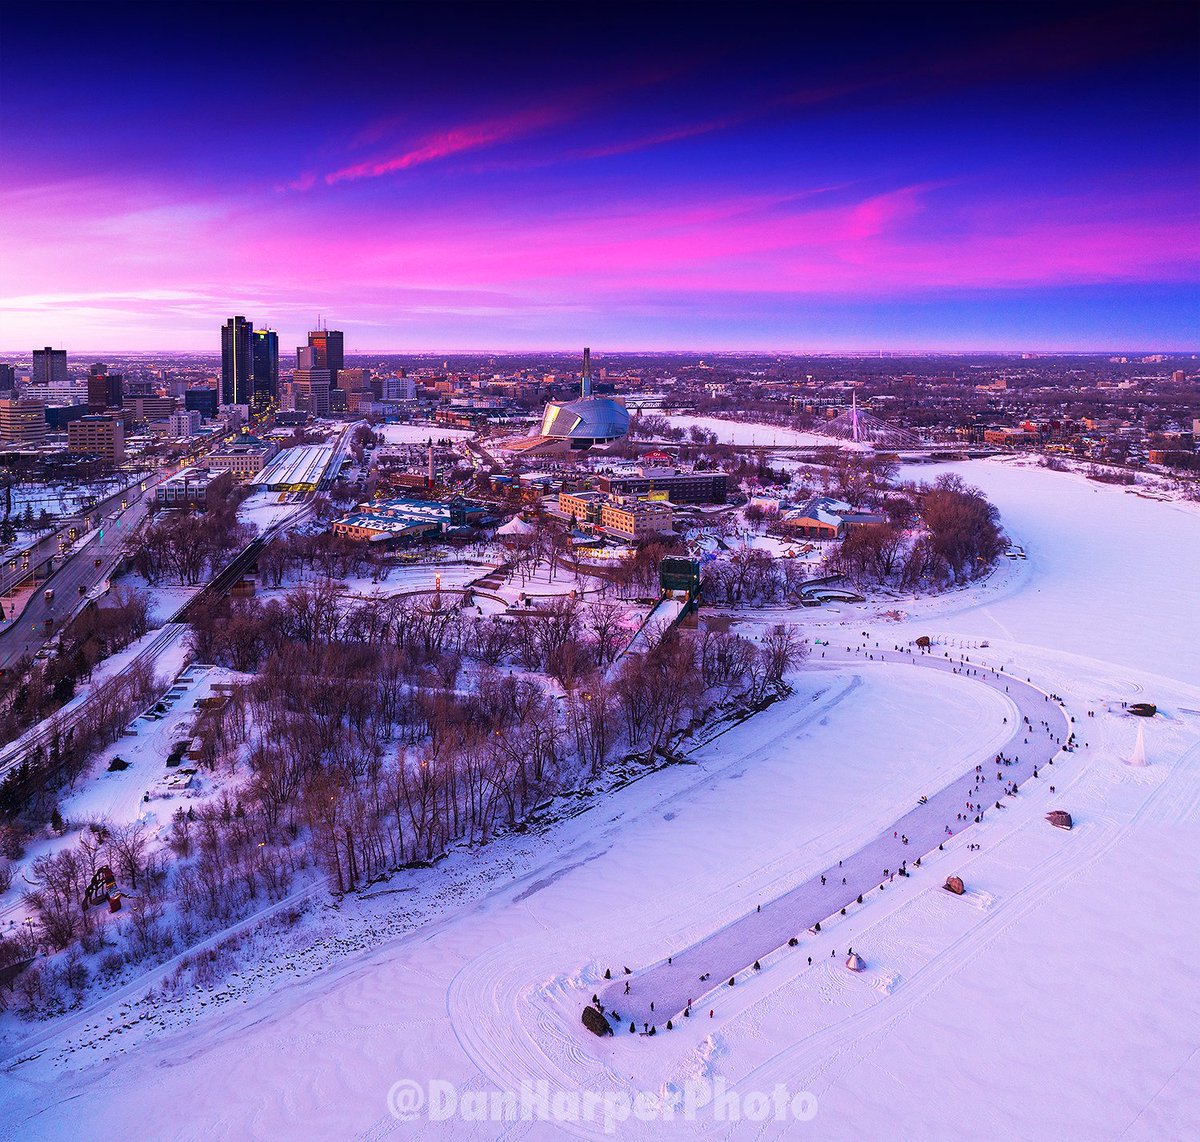 Even after #sunset there are still a ton of people enjoying the #NestaweyaRiverTrail !

#MeetMeAtTheForks #OnlyInThePeg #WinnipegPhotographer #LicensedDronePilot #DronePhotography #Drone